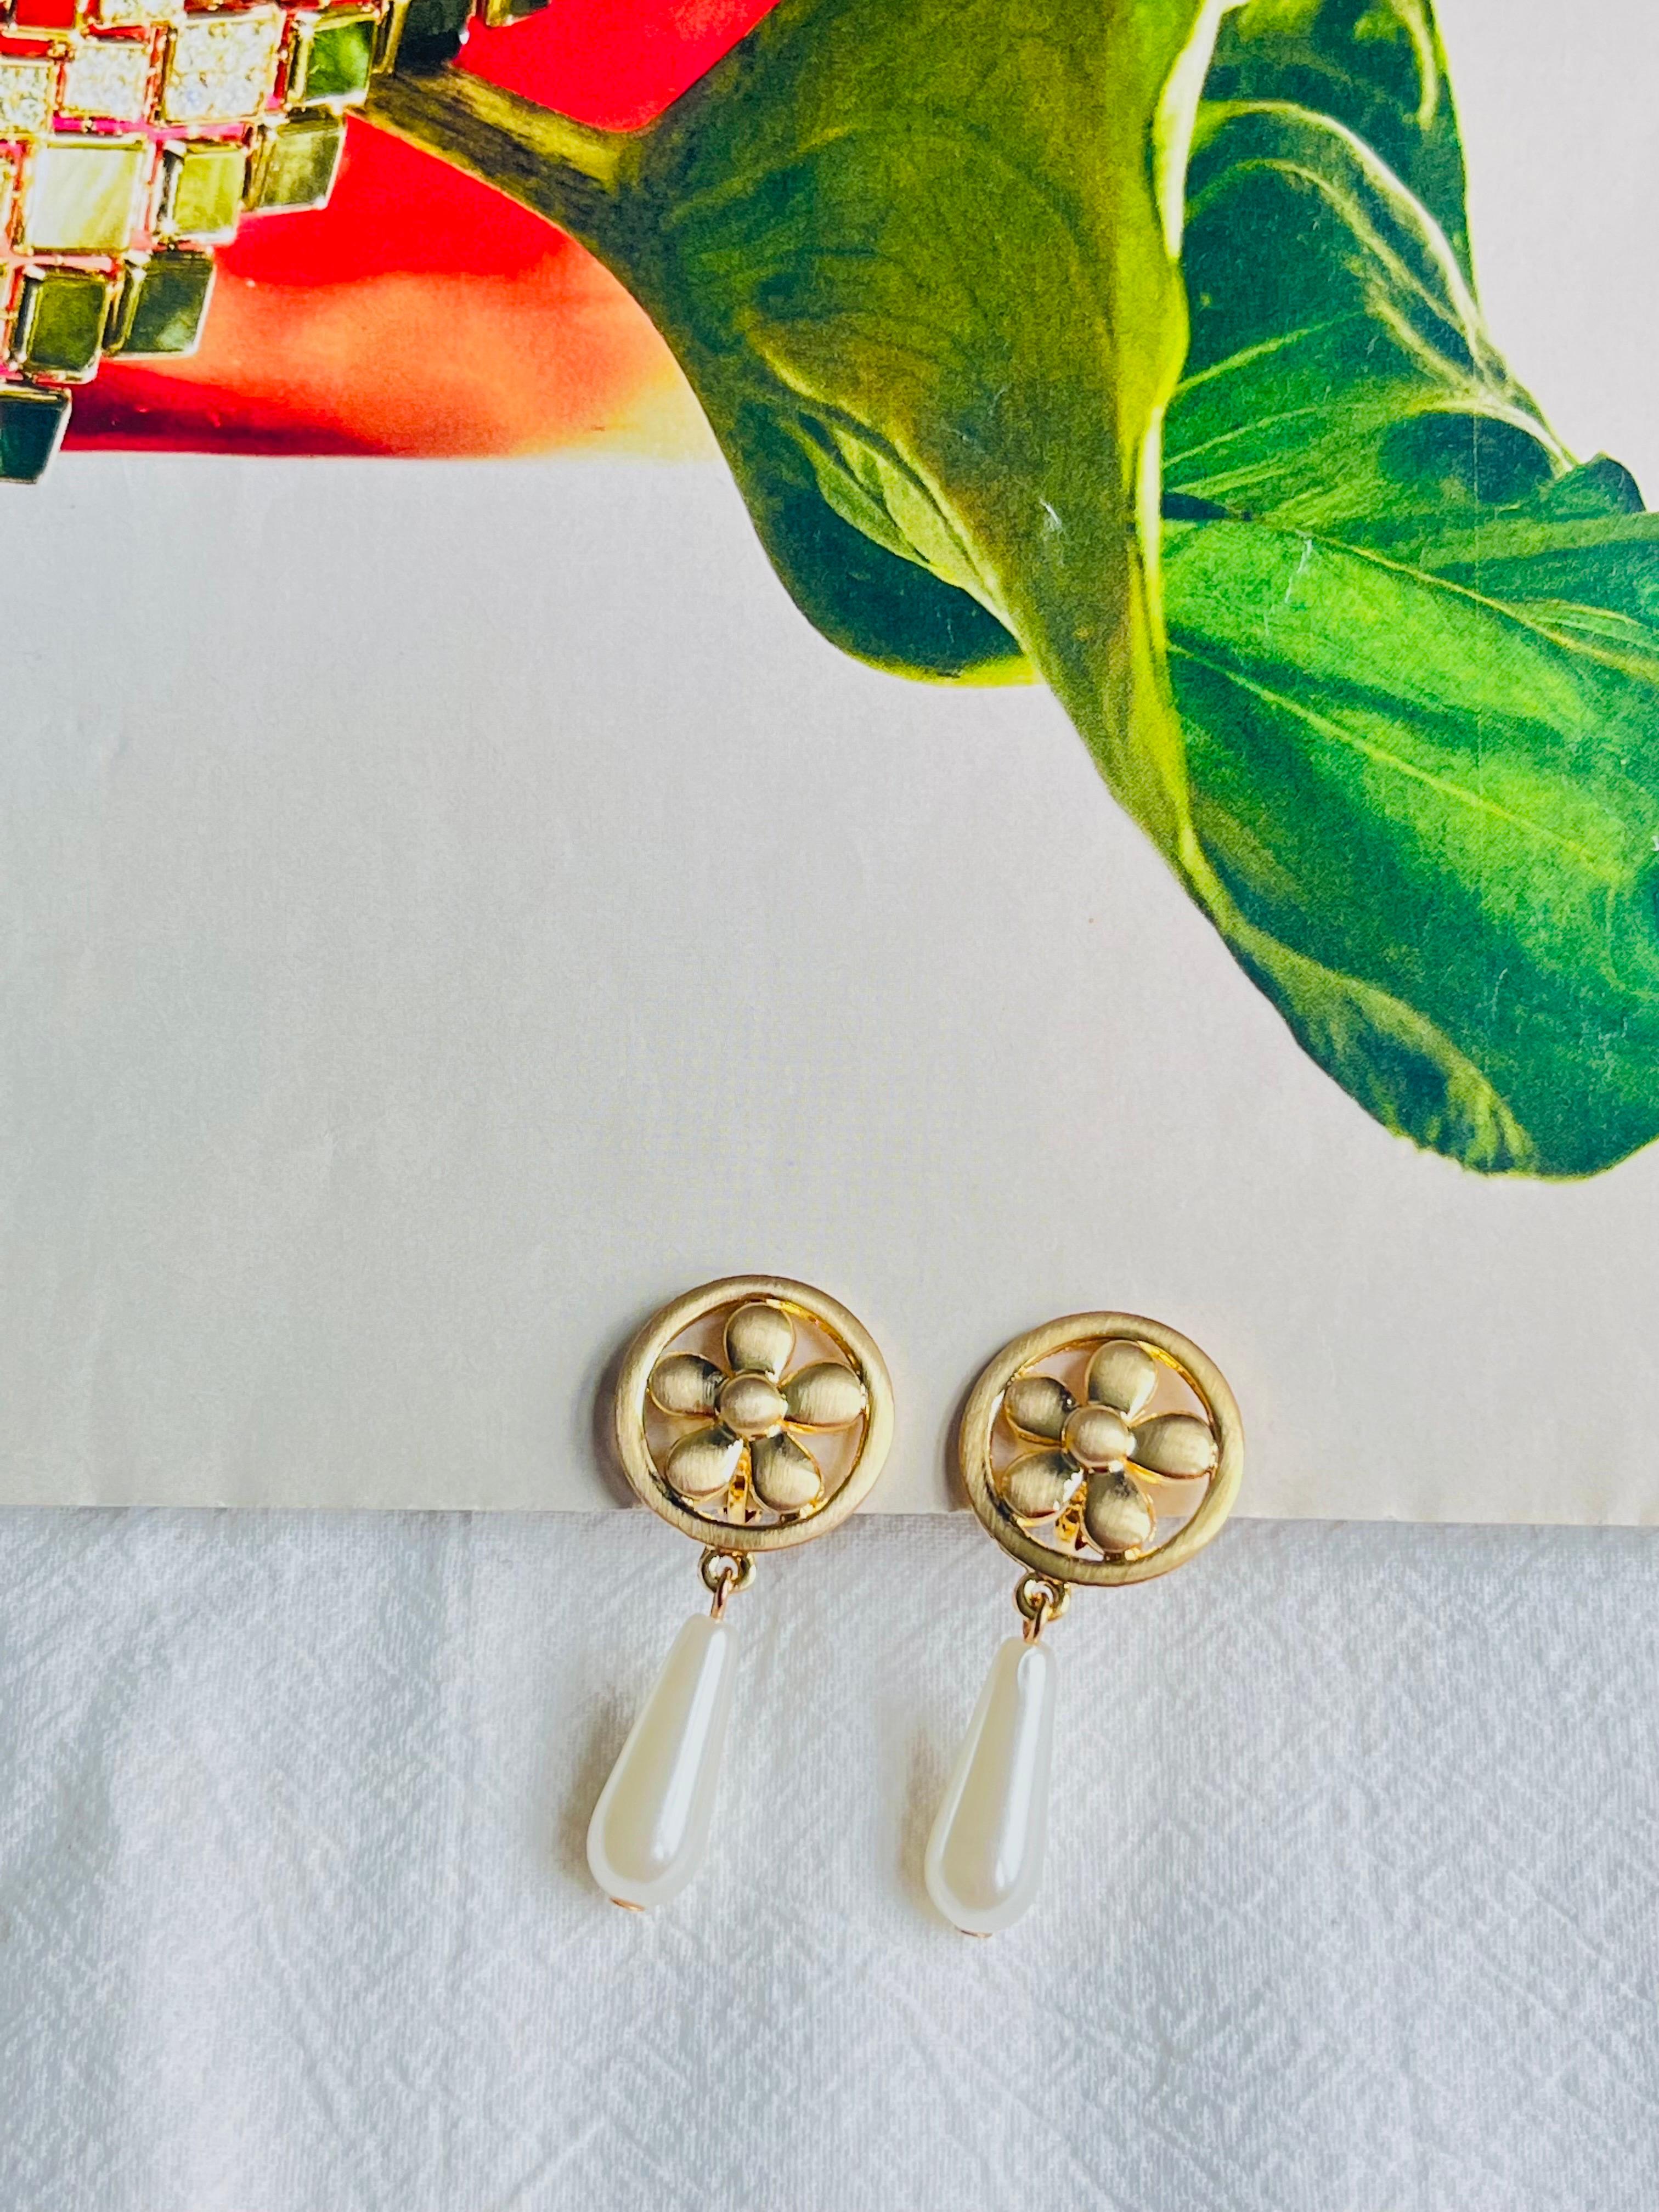 Flower Daisy Round Openwork Long Water Drop White Pearl Gold Clip On Earrings In New Condition For Sale In Wokingham, England